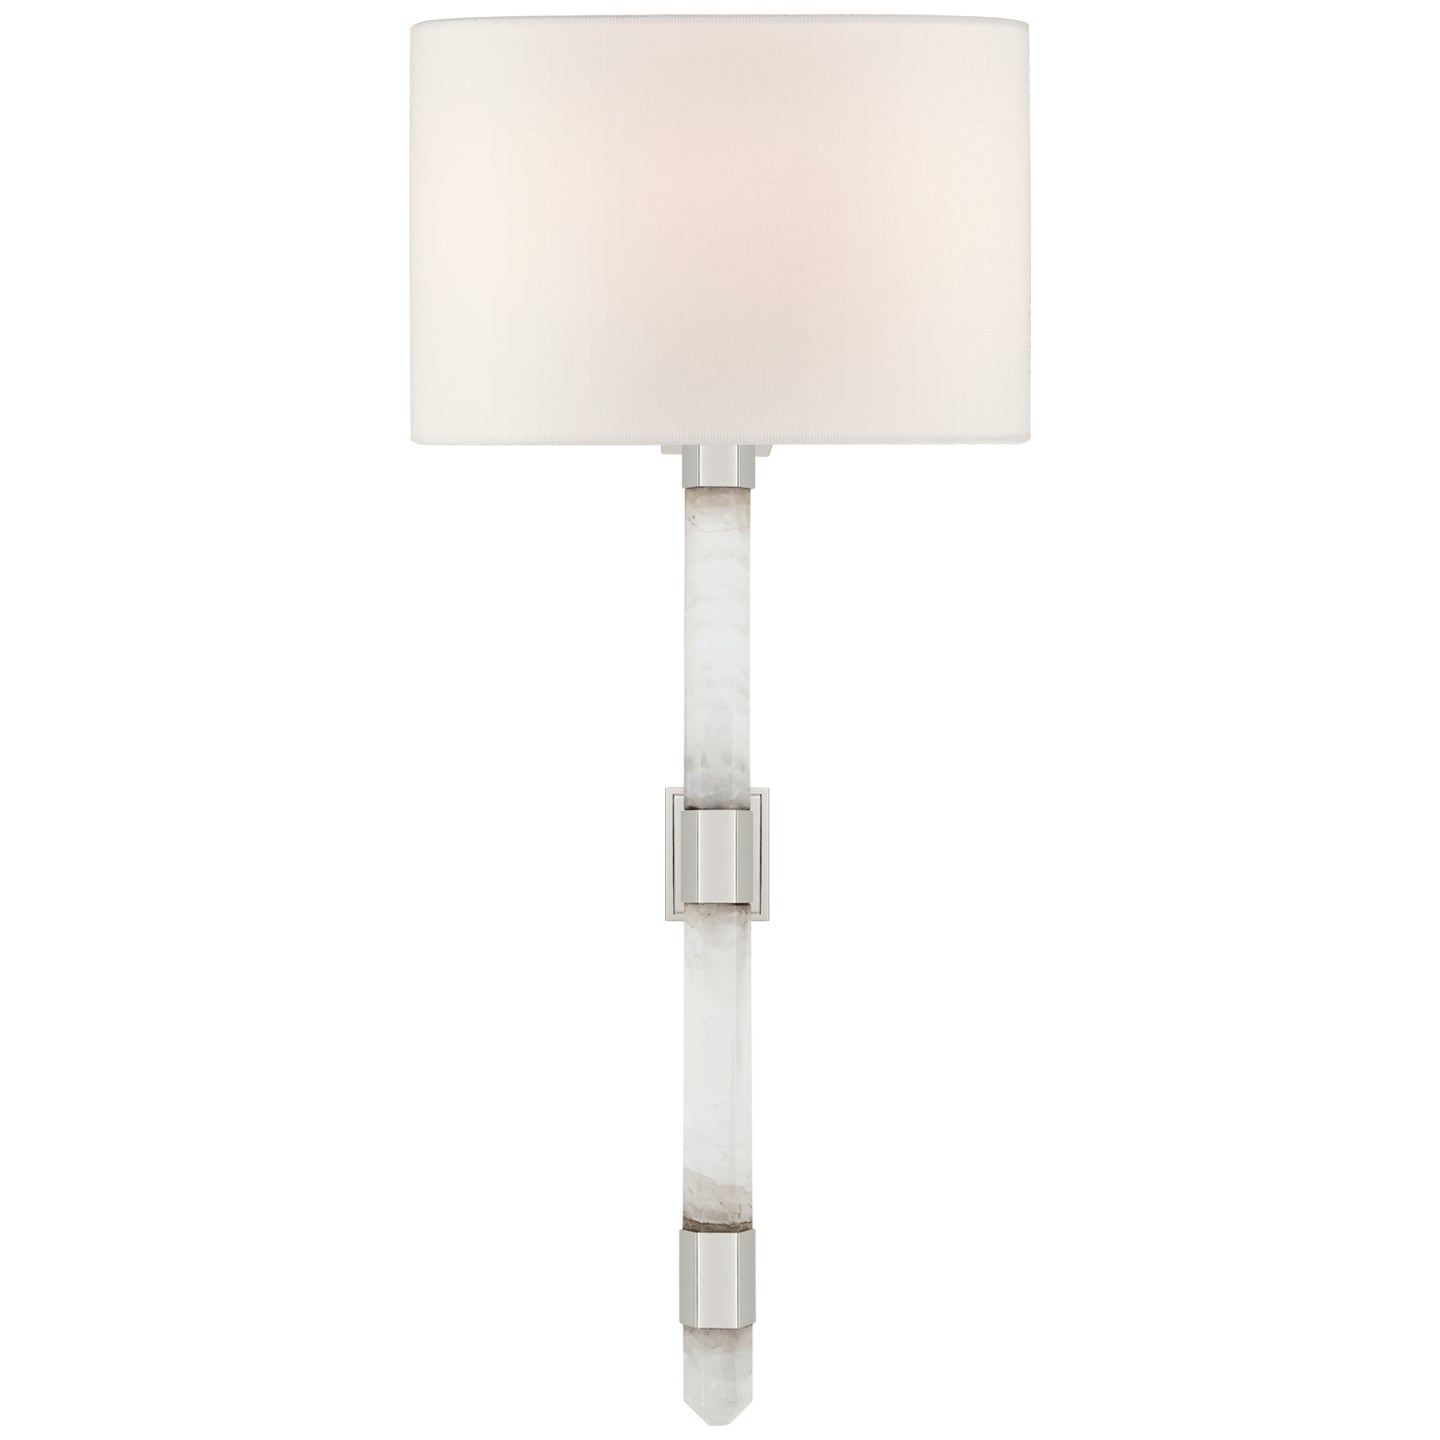 Visual Comfort Signature - SK 2904PN/Q-L - One Light Wall Sconce - Adaline - Polished Nickel